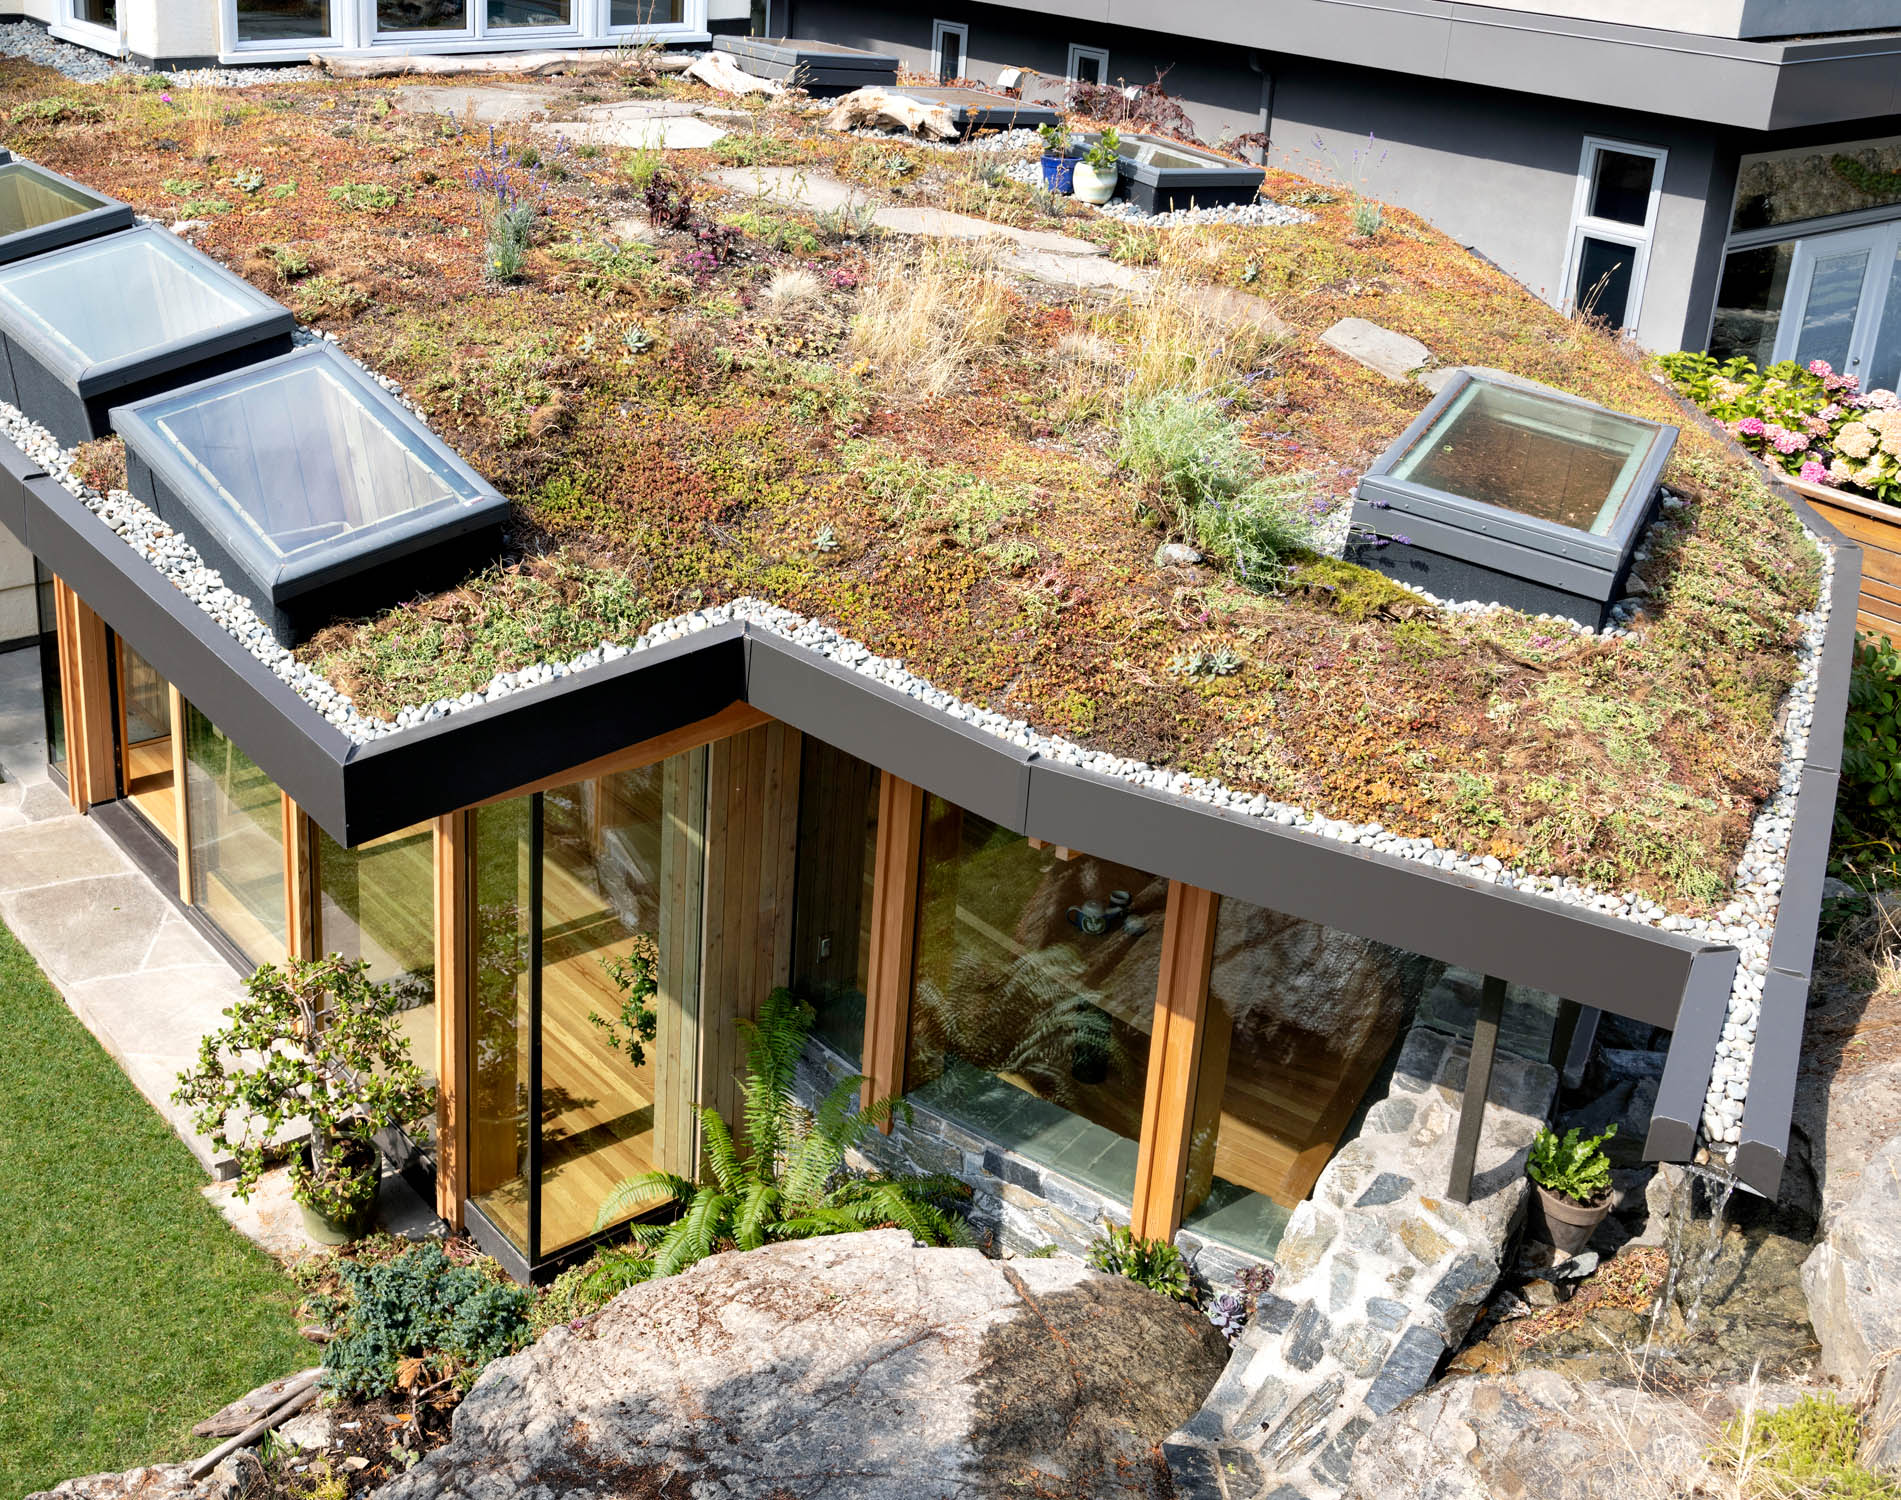 A living roof with native plants captures rainwater for a small water feature.